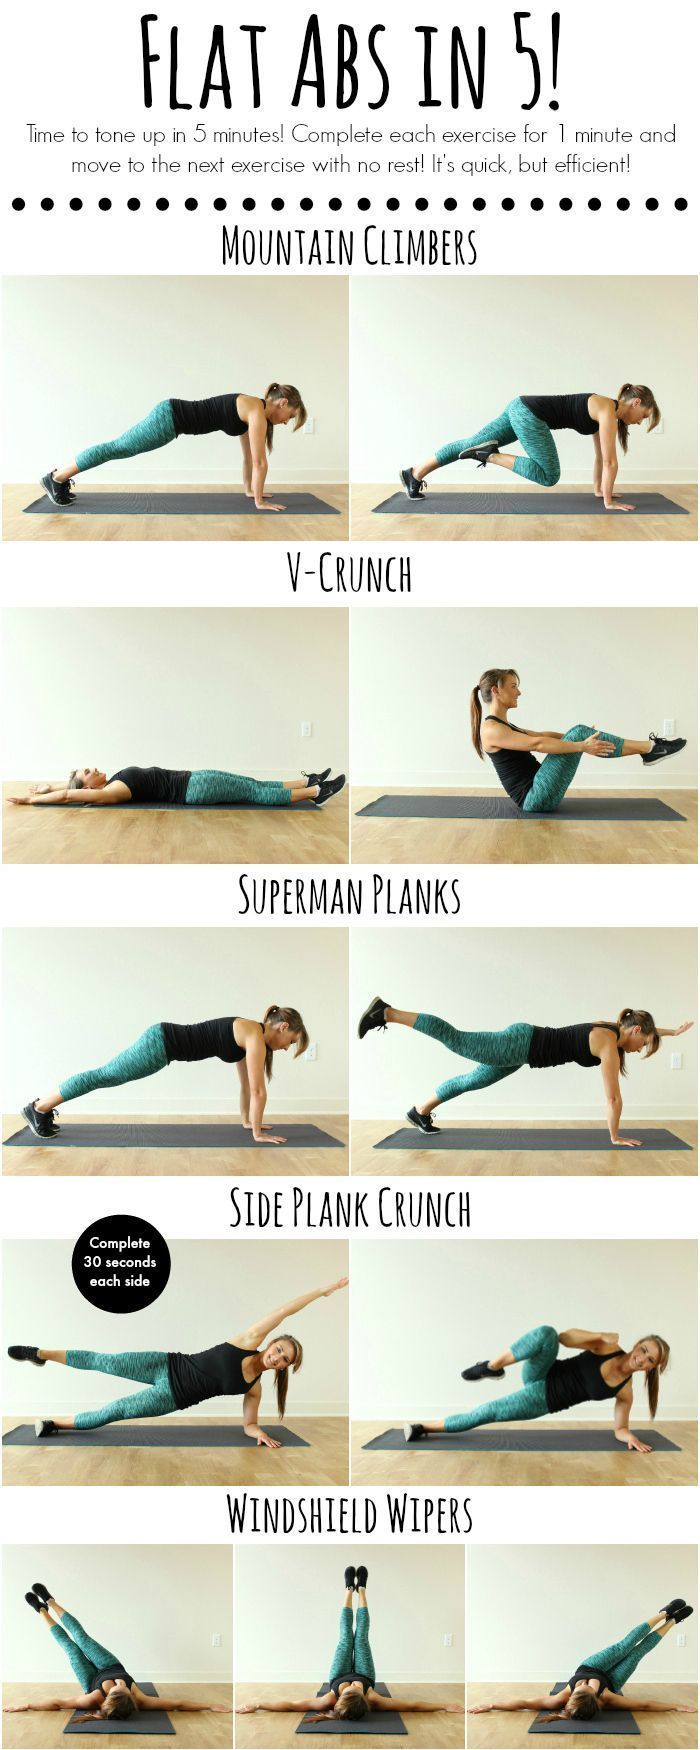 Tone up in 5 minutes with this quick and efficient ab workout! – Flat Abs in 5! | www.coovysports.com | #CoovySports.